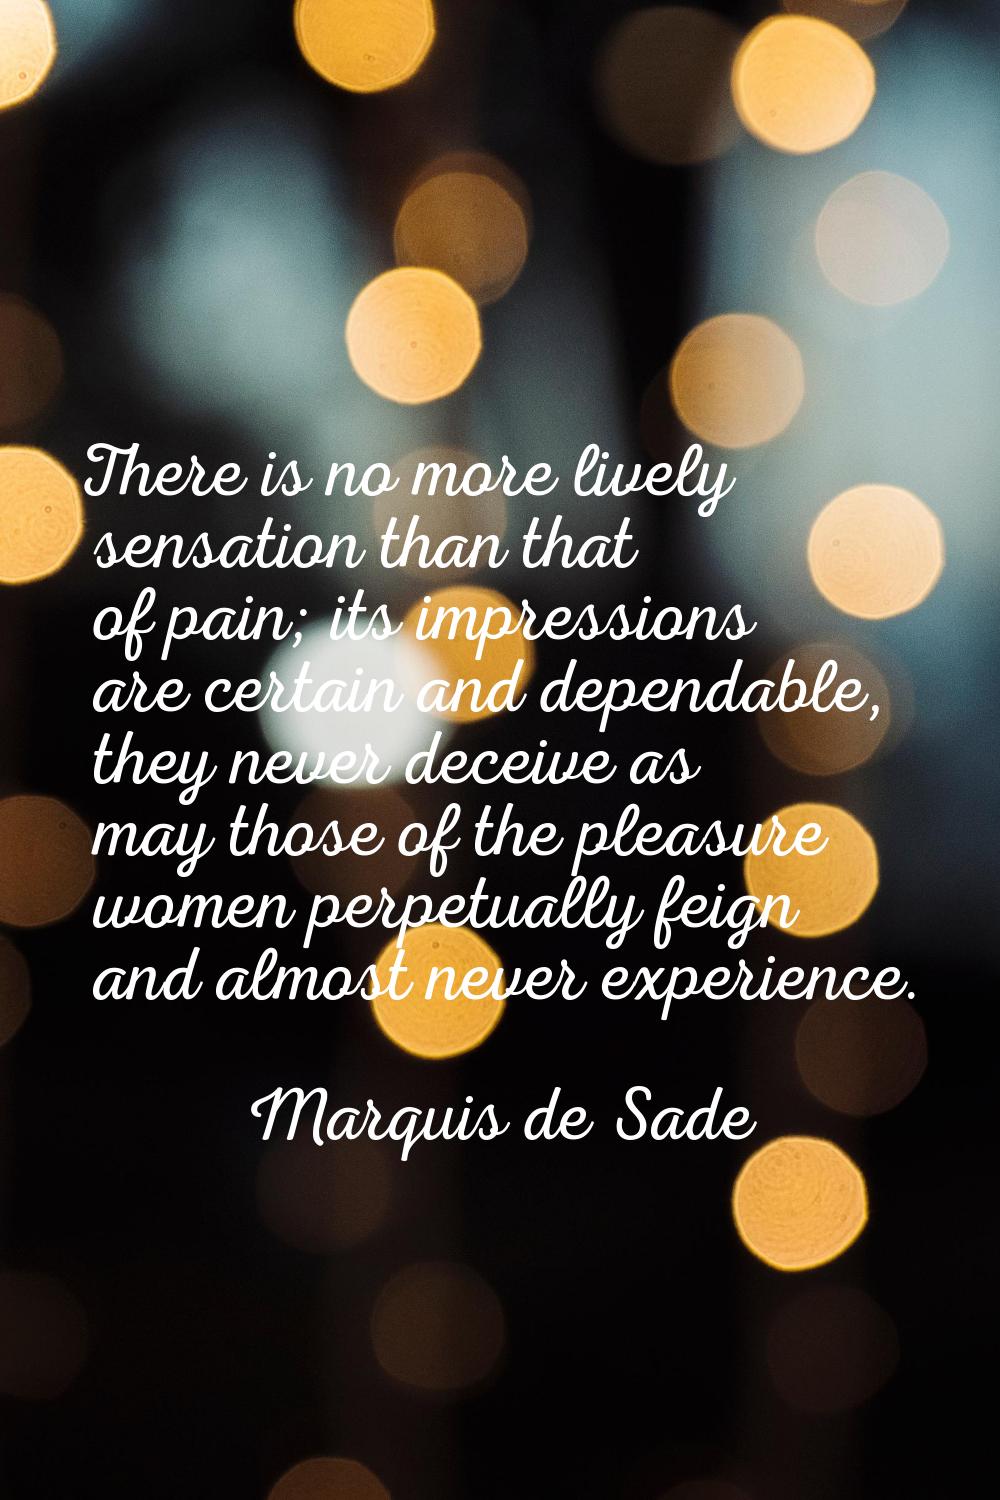 There is no more lively sensation than that of pain; its impressions are certain and dependable, th